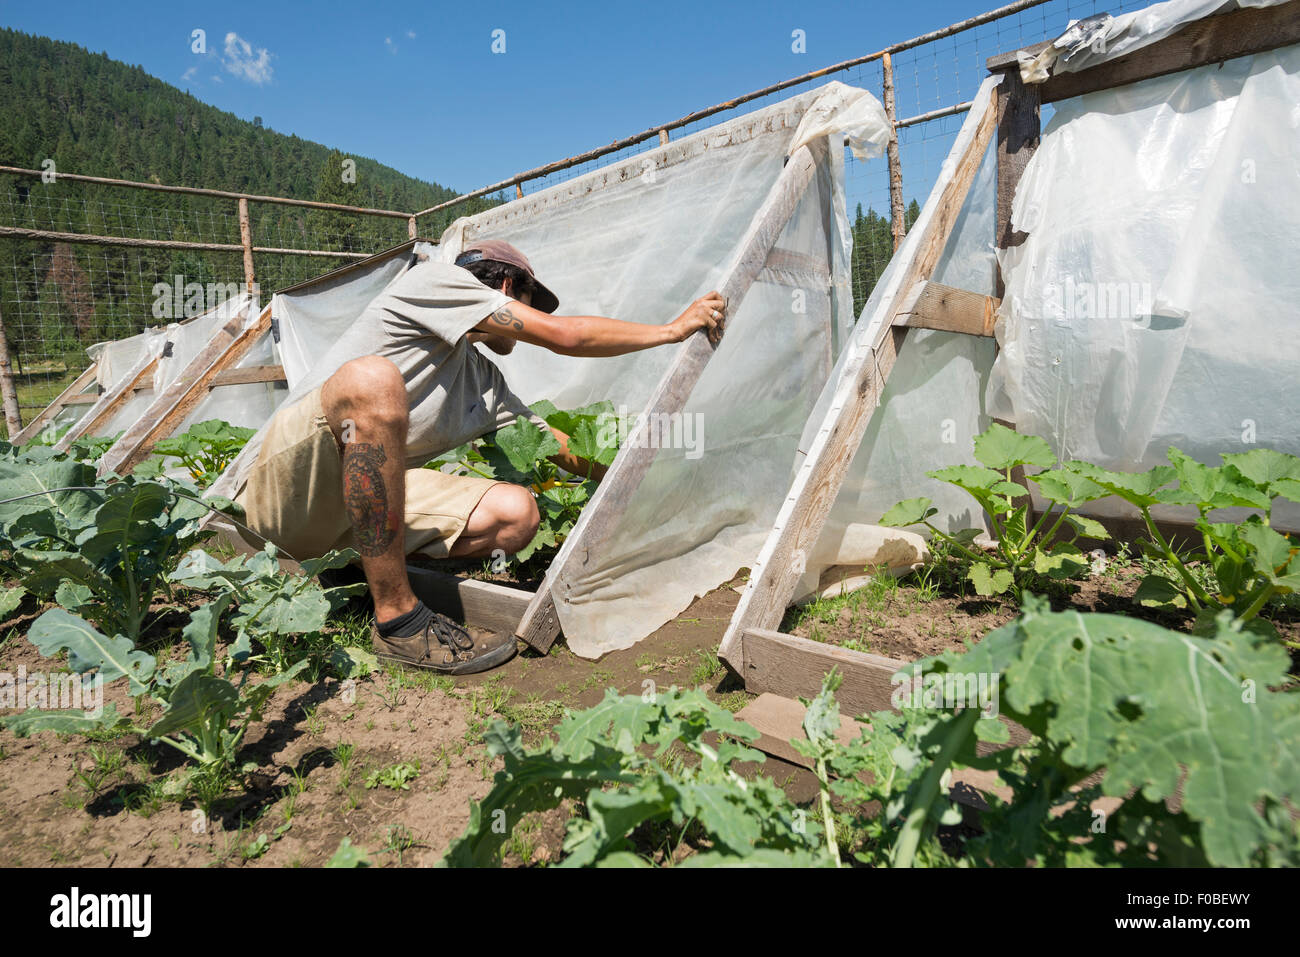 Gardener weeding cold frames in the garden of the Minam River lodge in Oregon's Wallowa Mountains. Stock Photo